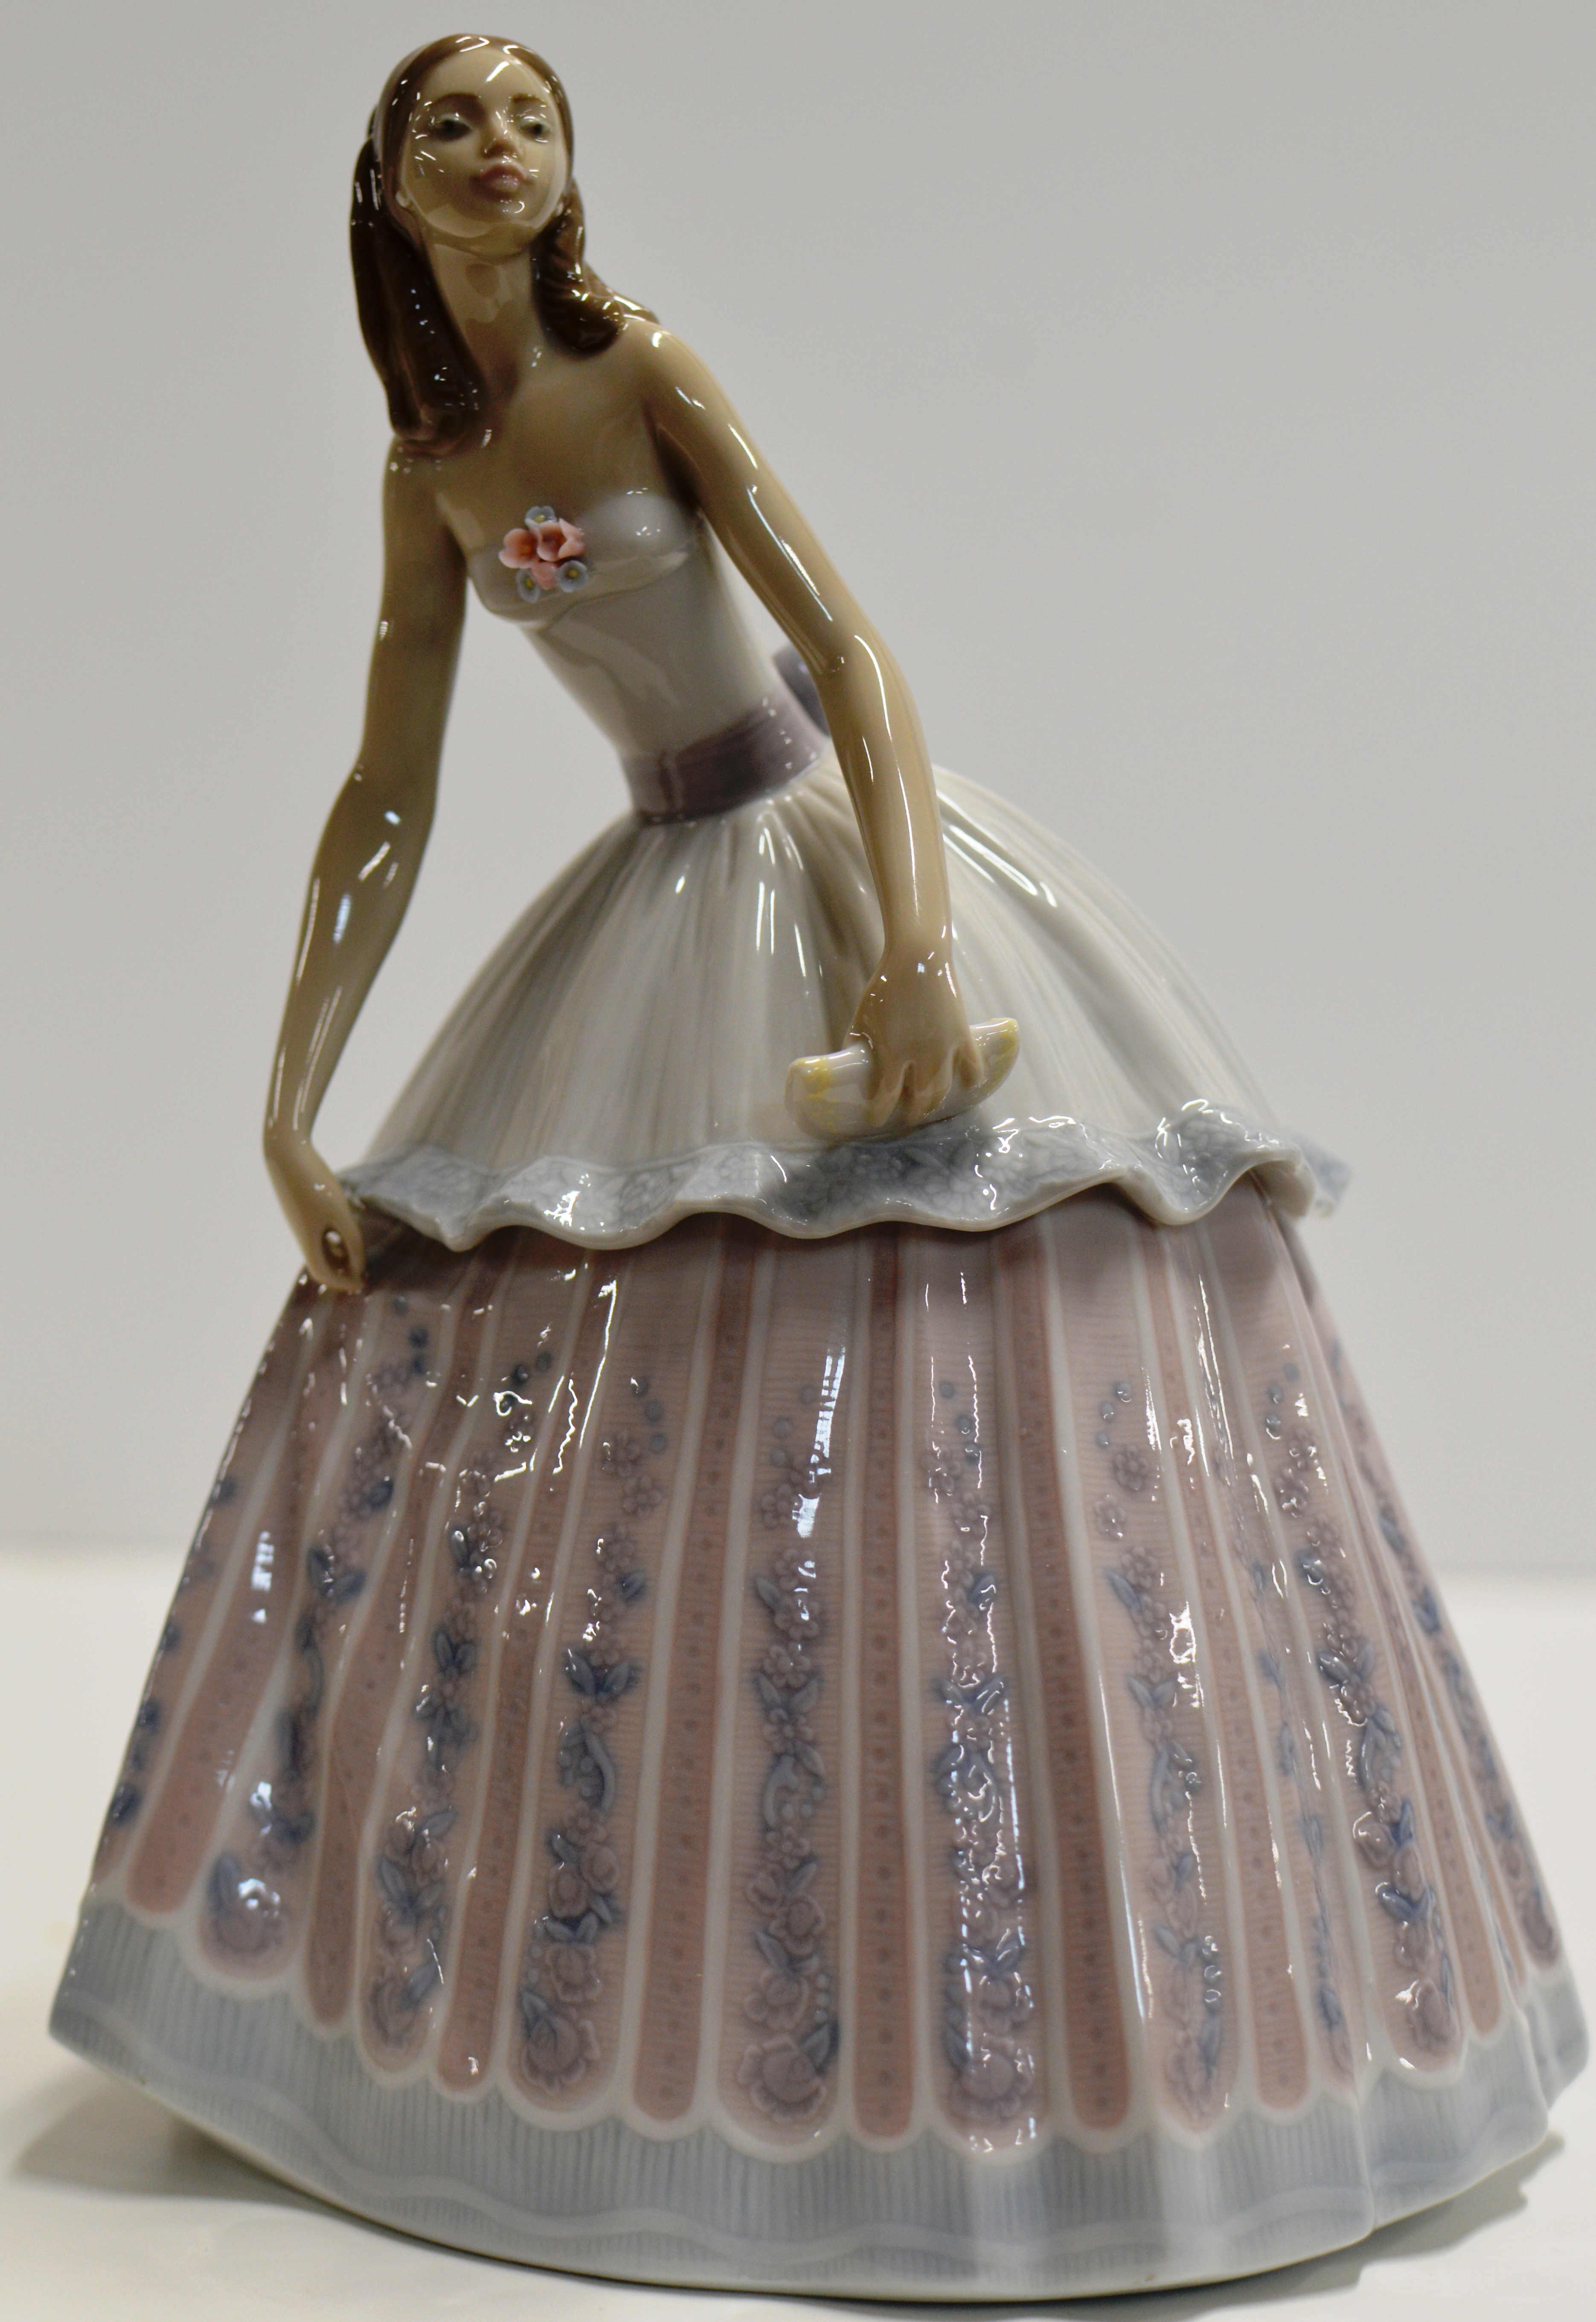 8¾" LLADRO PORCELAIN FIGURINE ORNAMENT - WAITING TO DANCE 05858, WITH ORIGINAL BOX